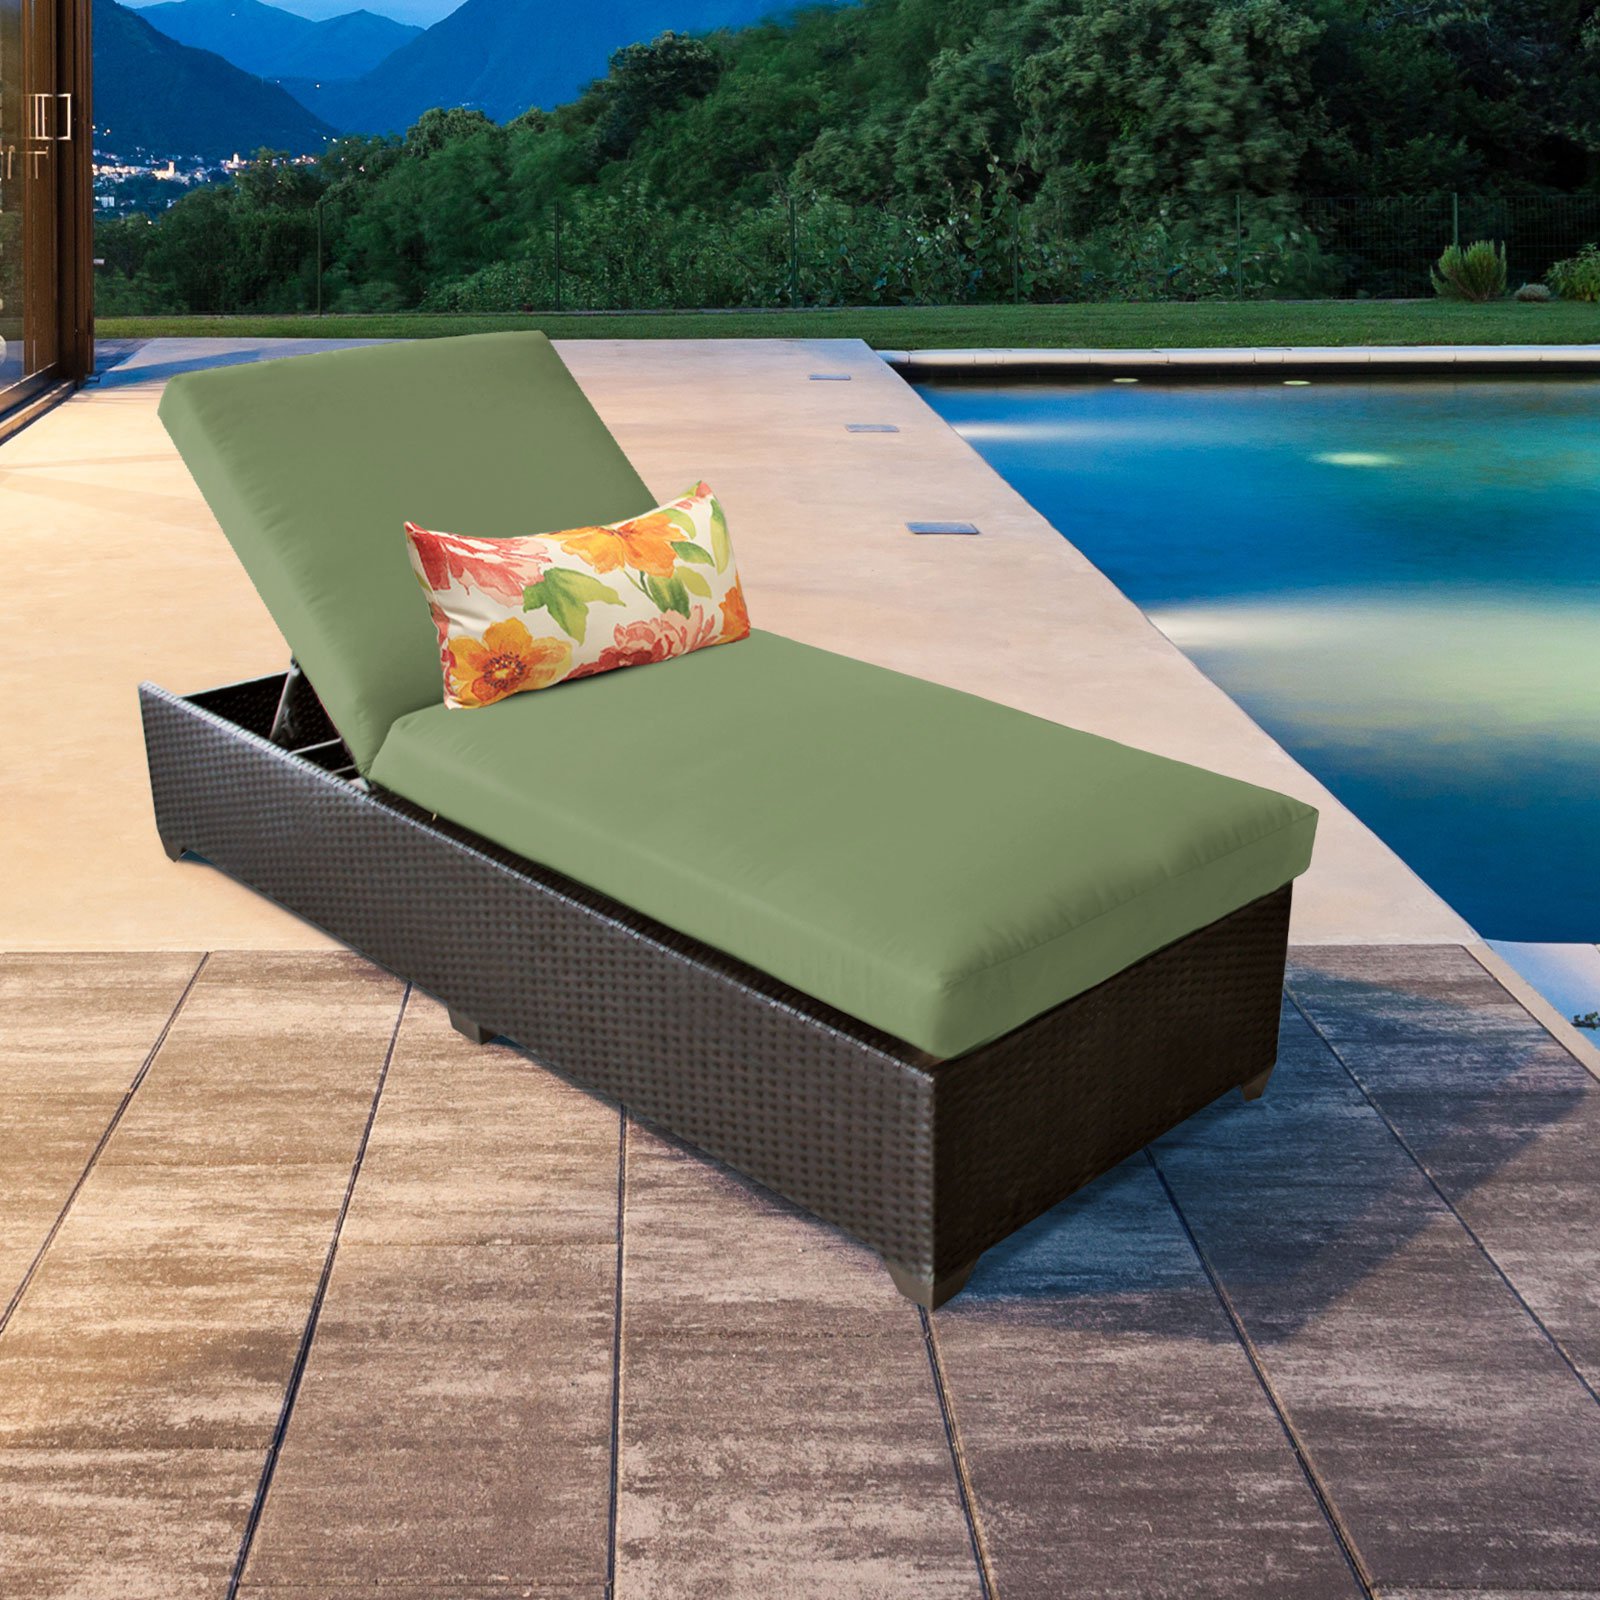 Barbados Chaise Outdoor Wicker Patio Furniture with Side Table in Cilantro - image 4 of 10